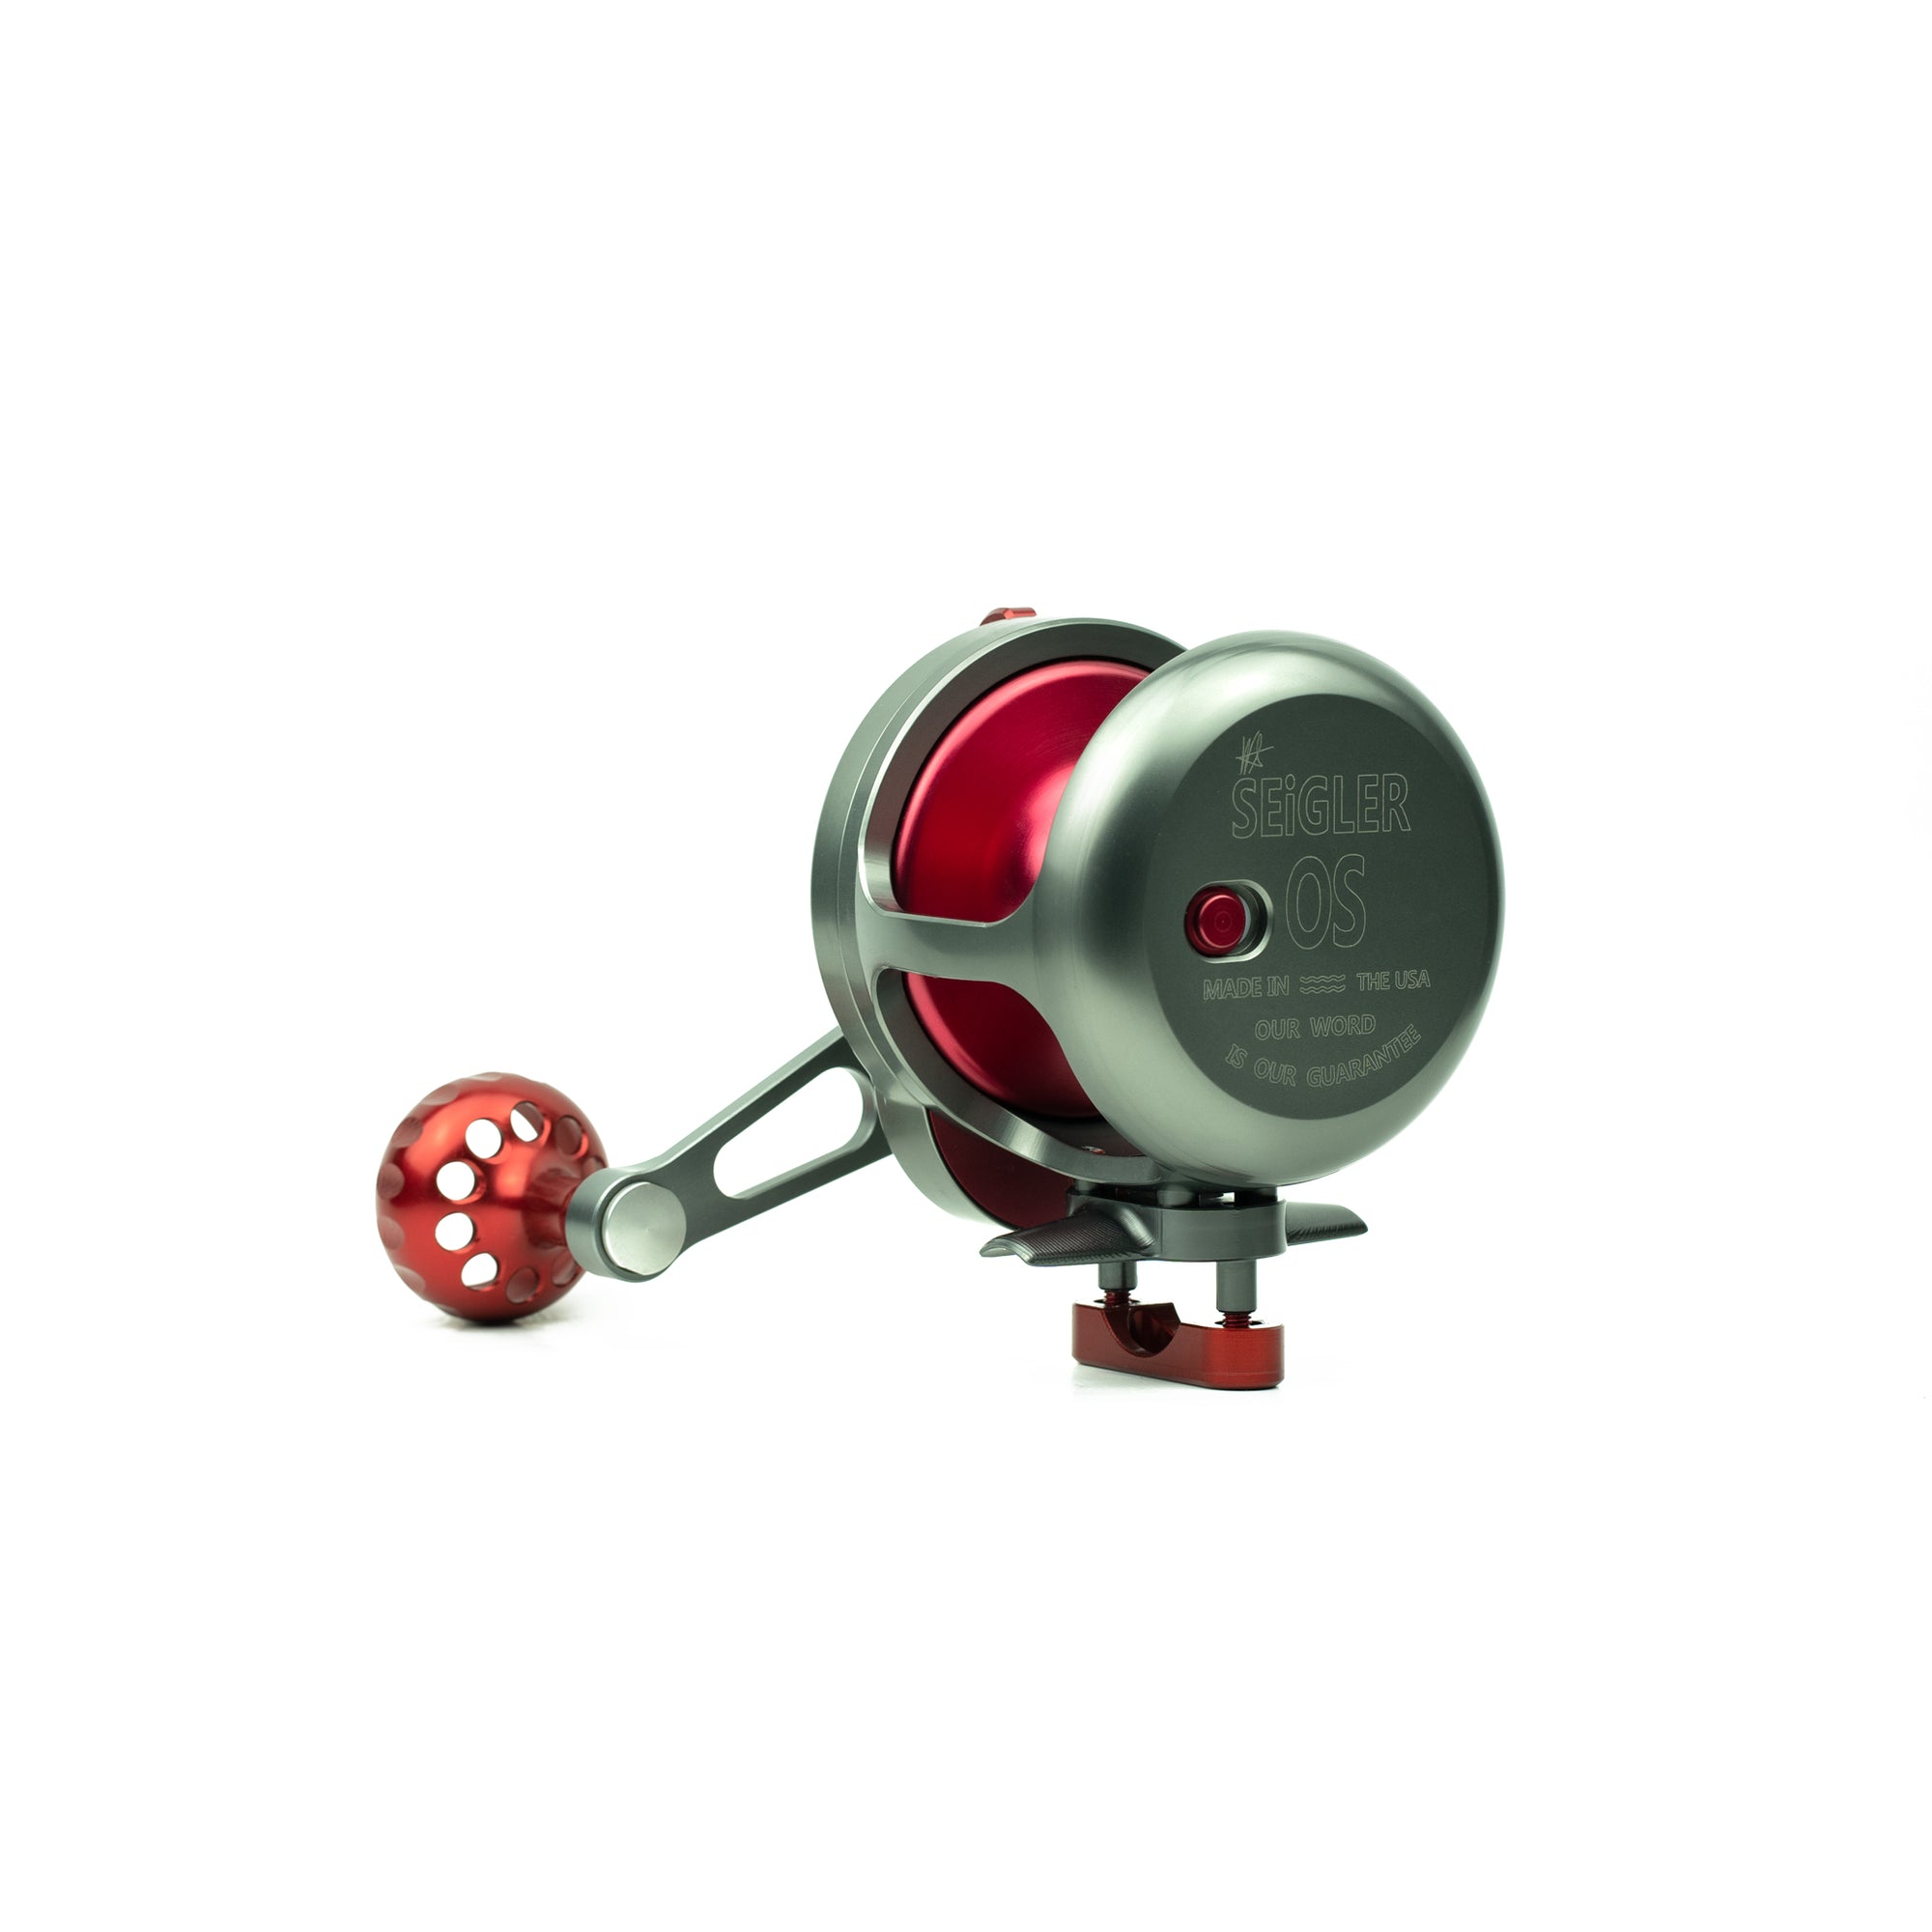 OS (Offshore Small), Lever Drag Fishing Reel